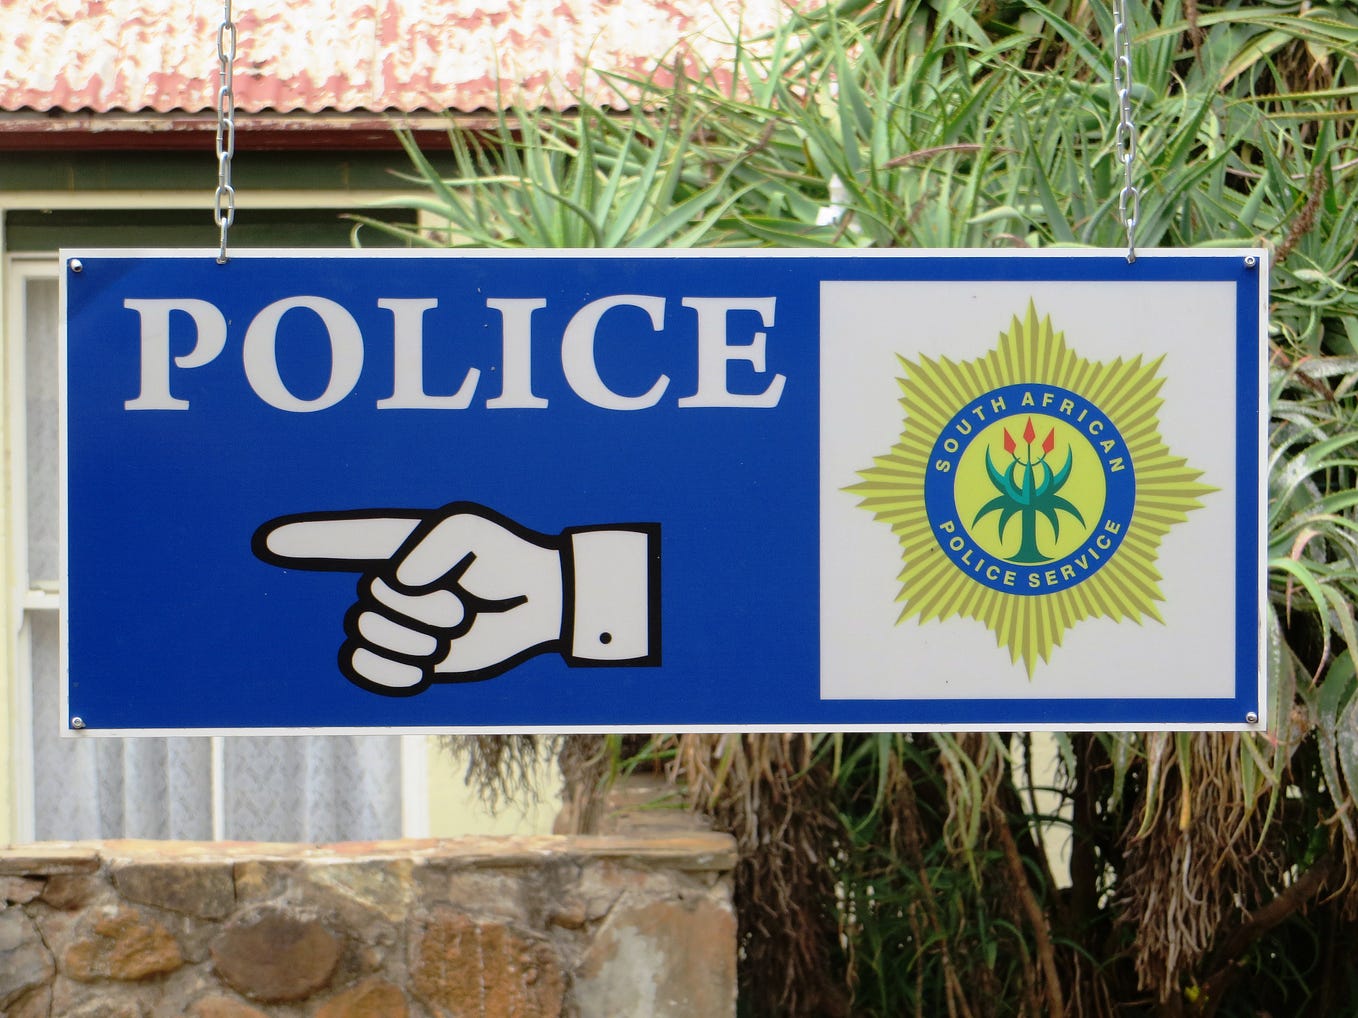 The terrible consequences of police corruption in South Africa